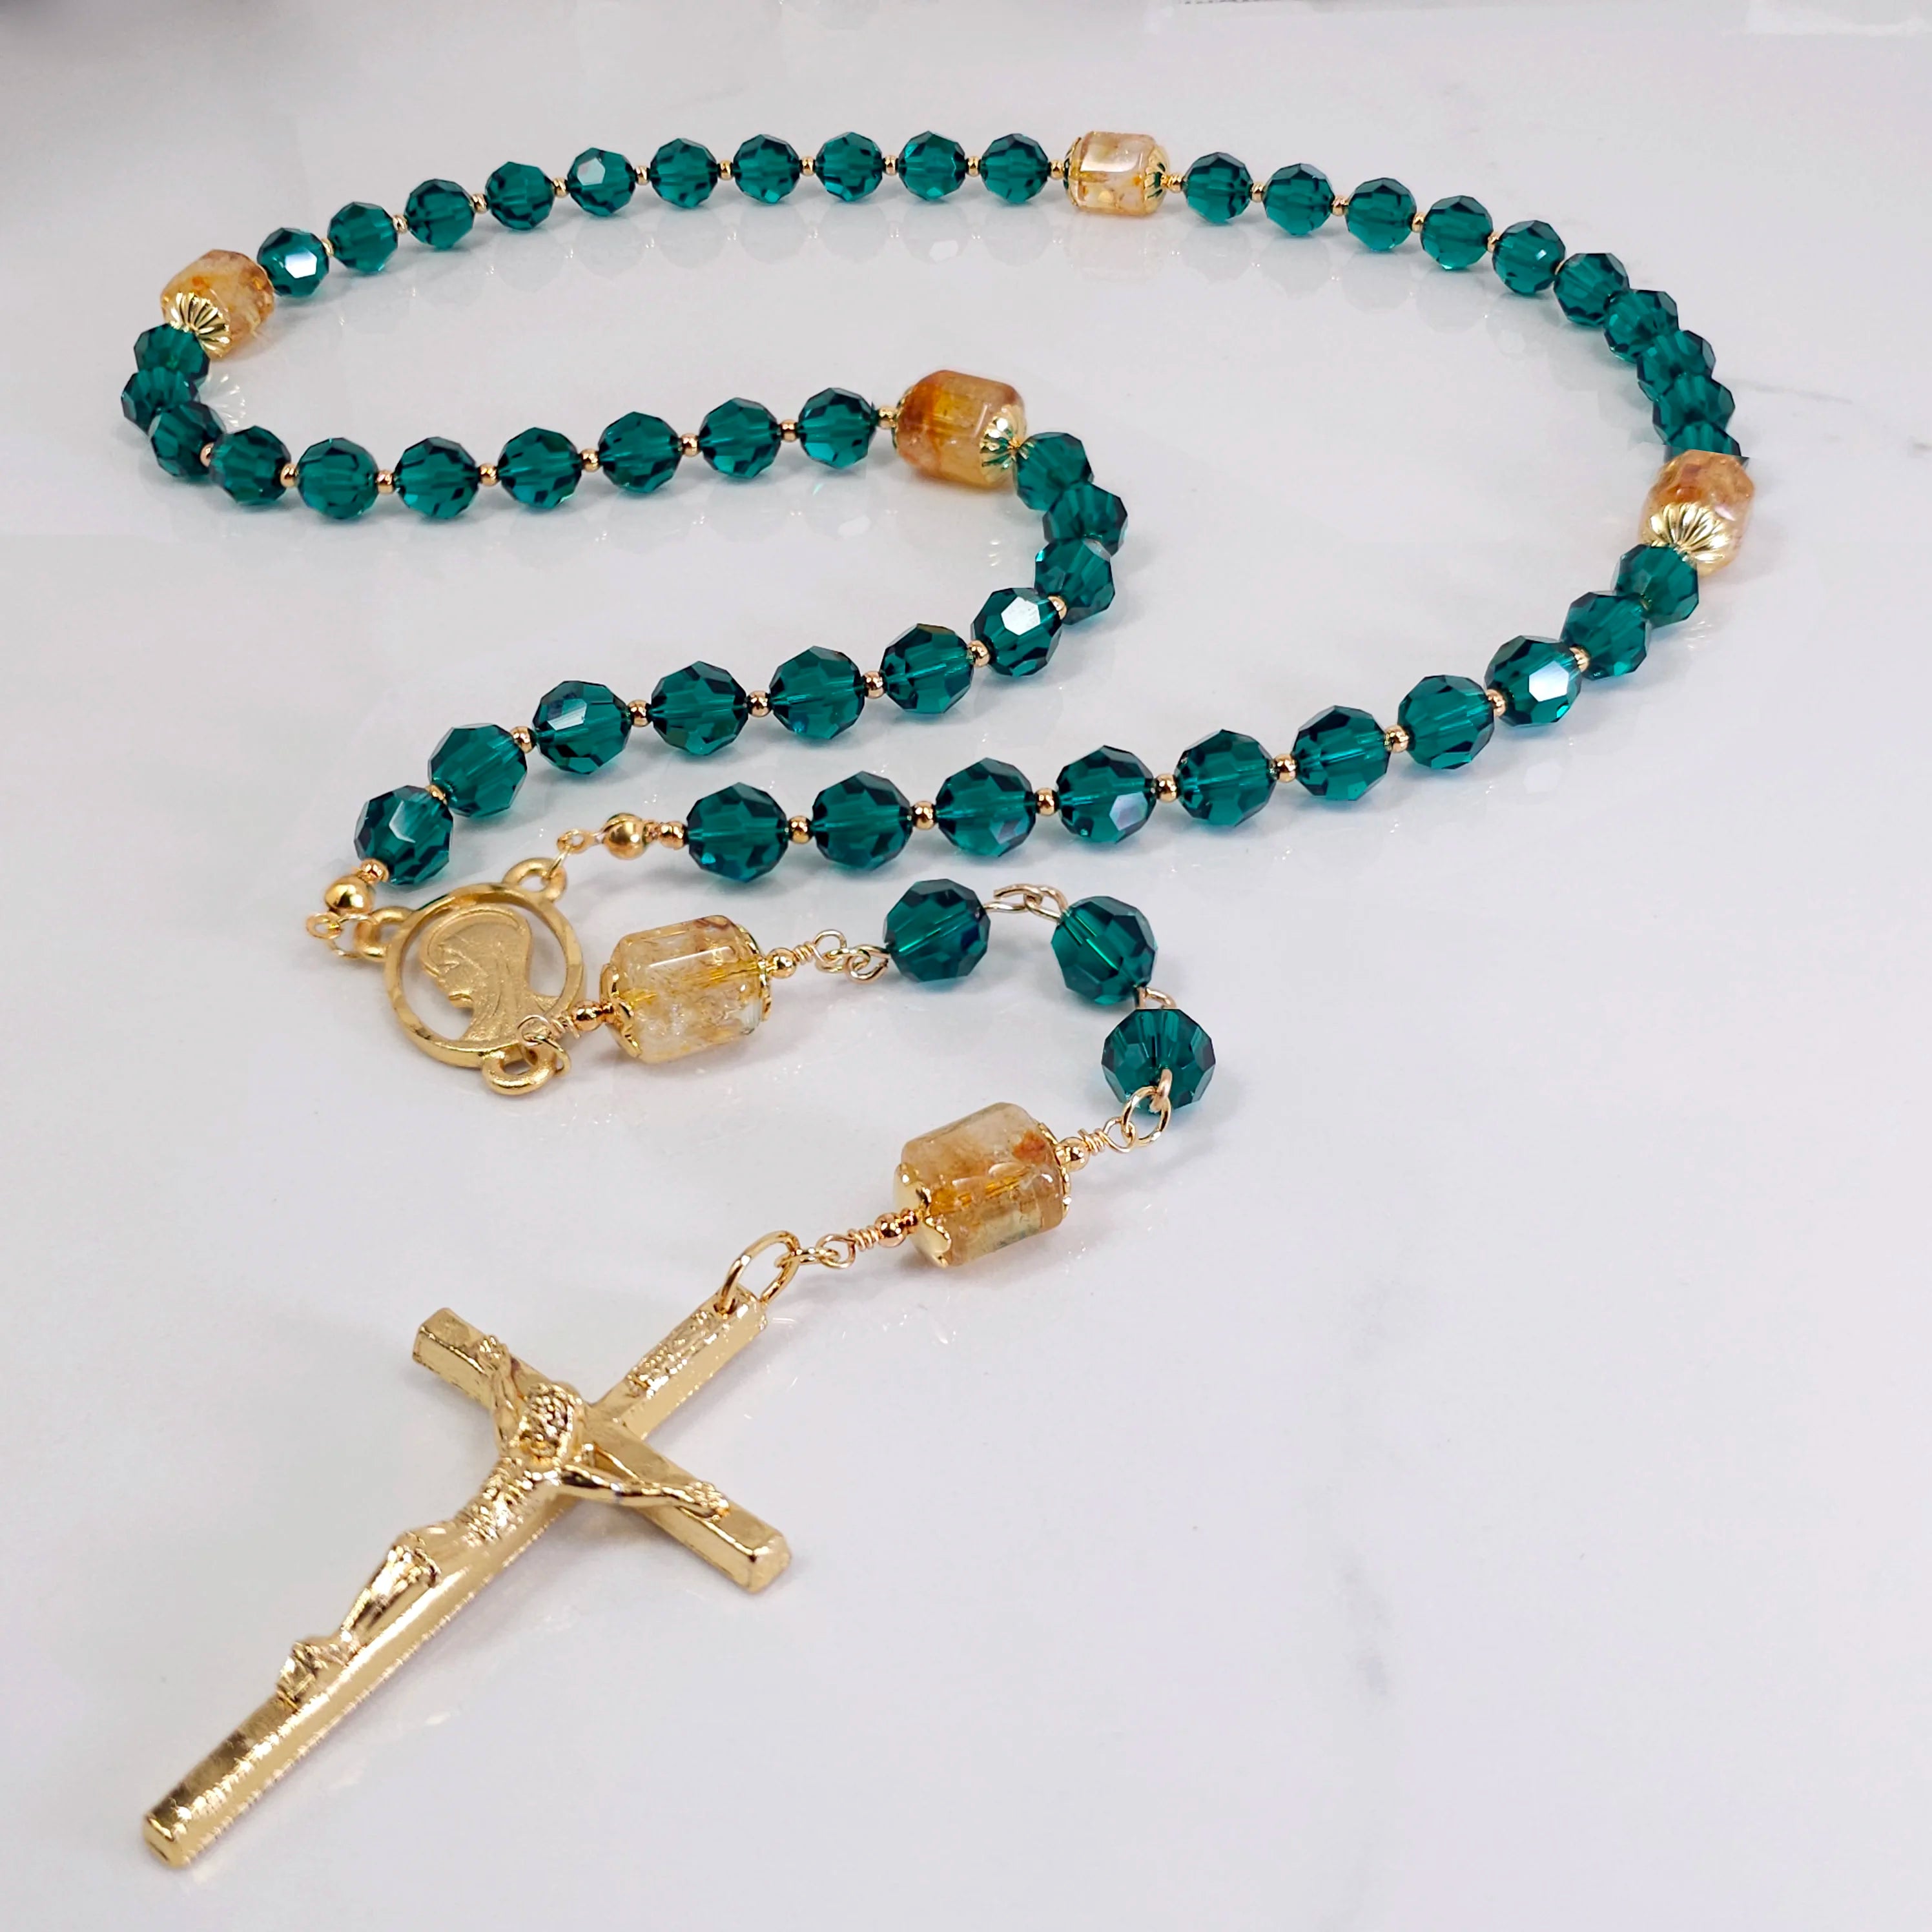 Green rosary made from Swarovski crystal embellished with gold cross and Madonna medal, lying on white marble.